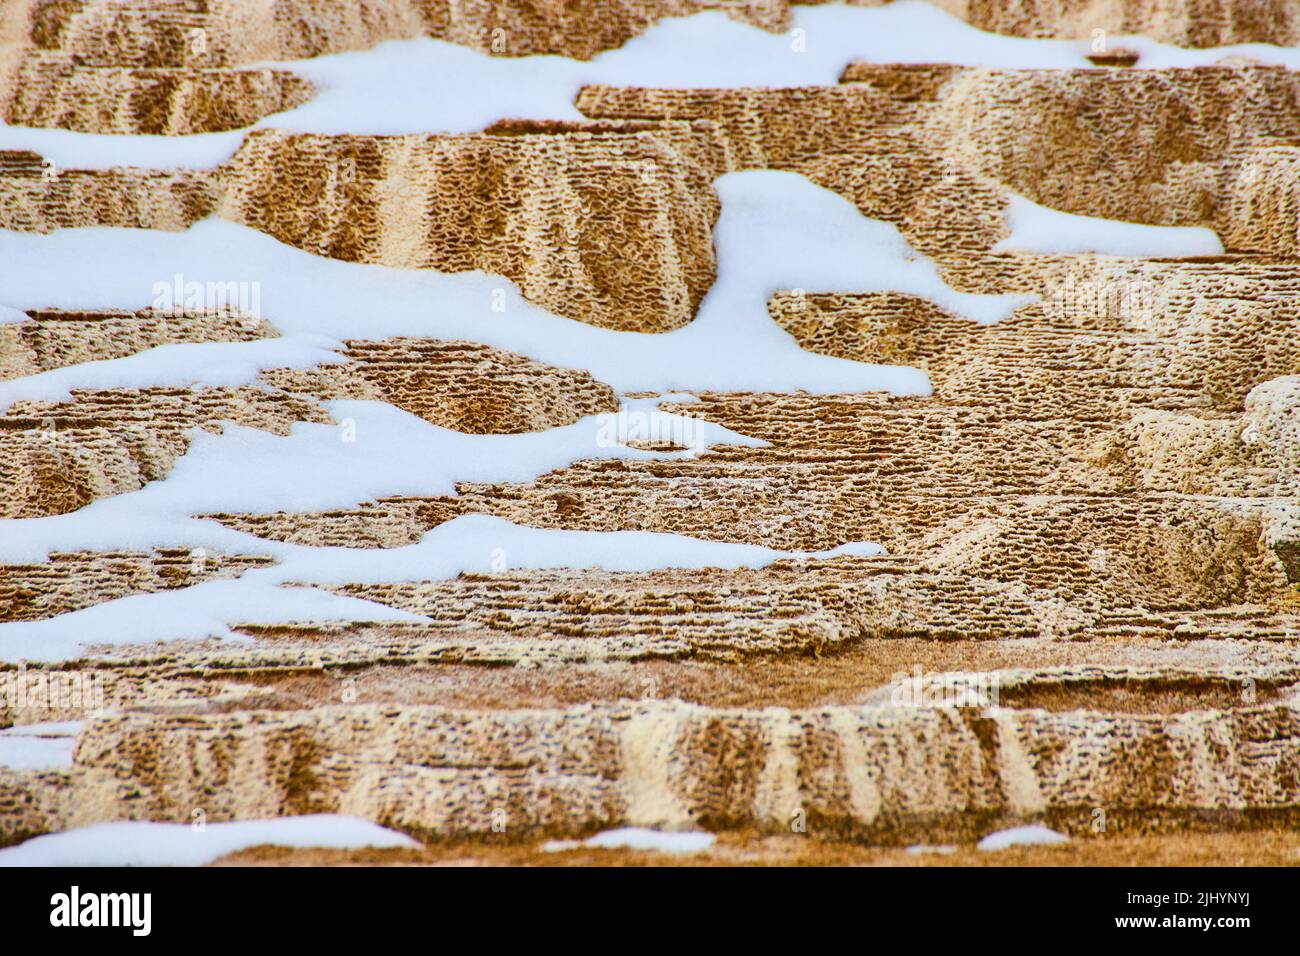 Yellowstone hot spring terraces in detail with patches of snow Stock Photo